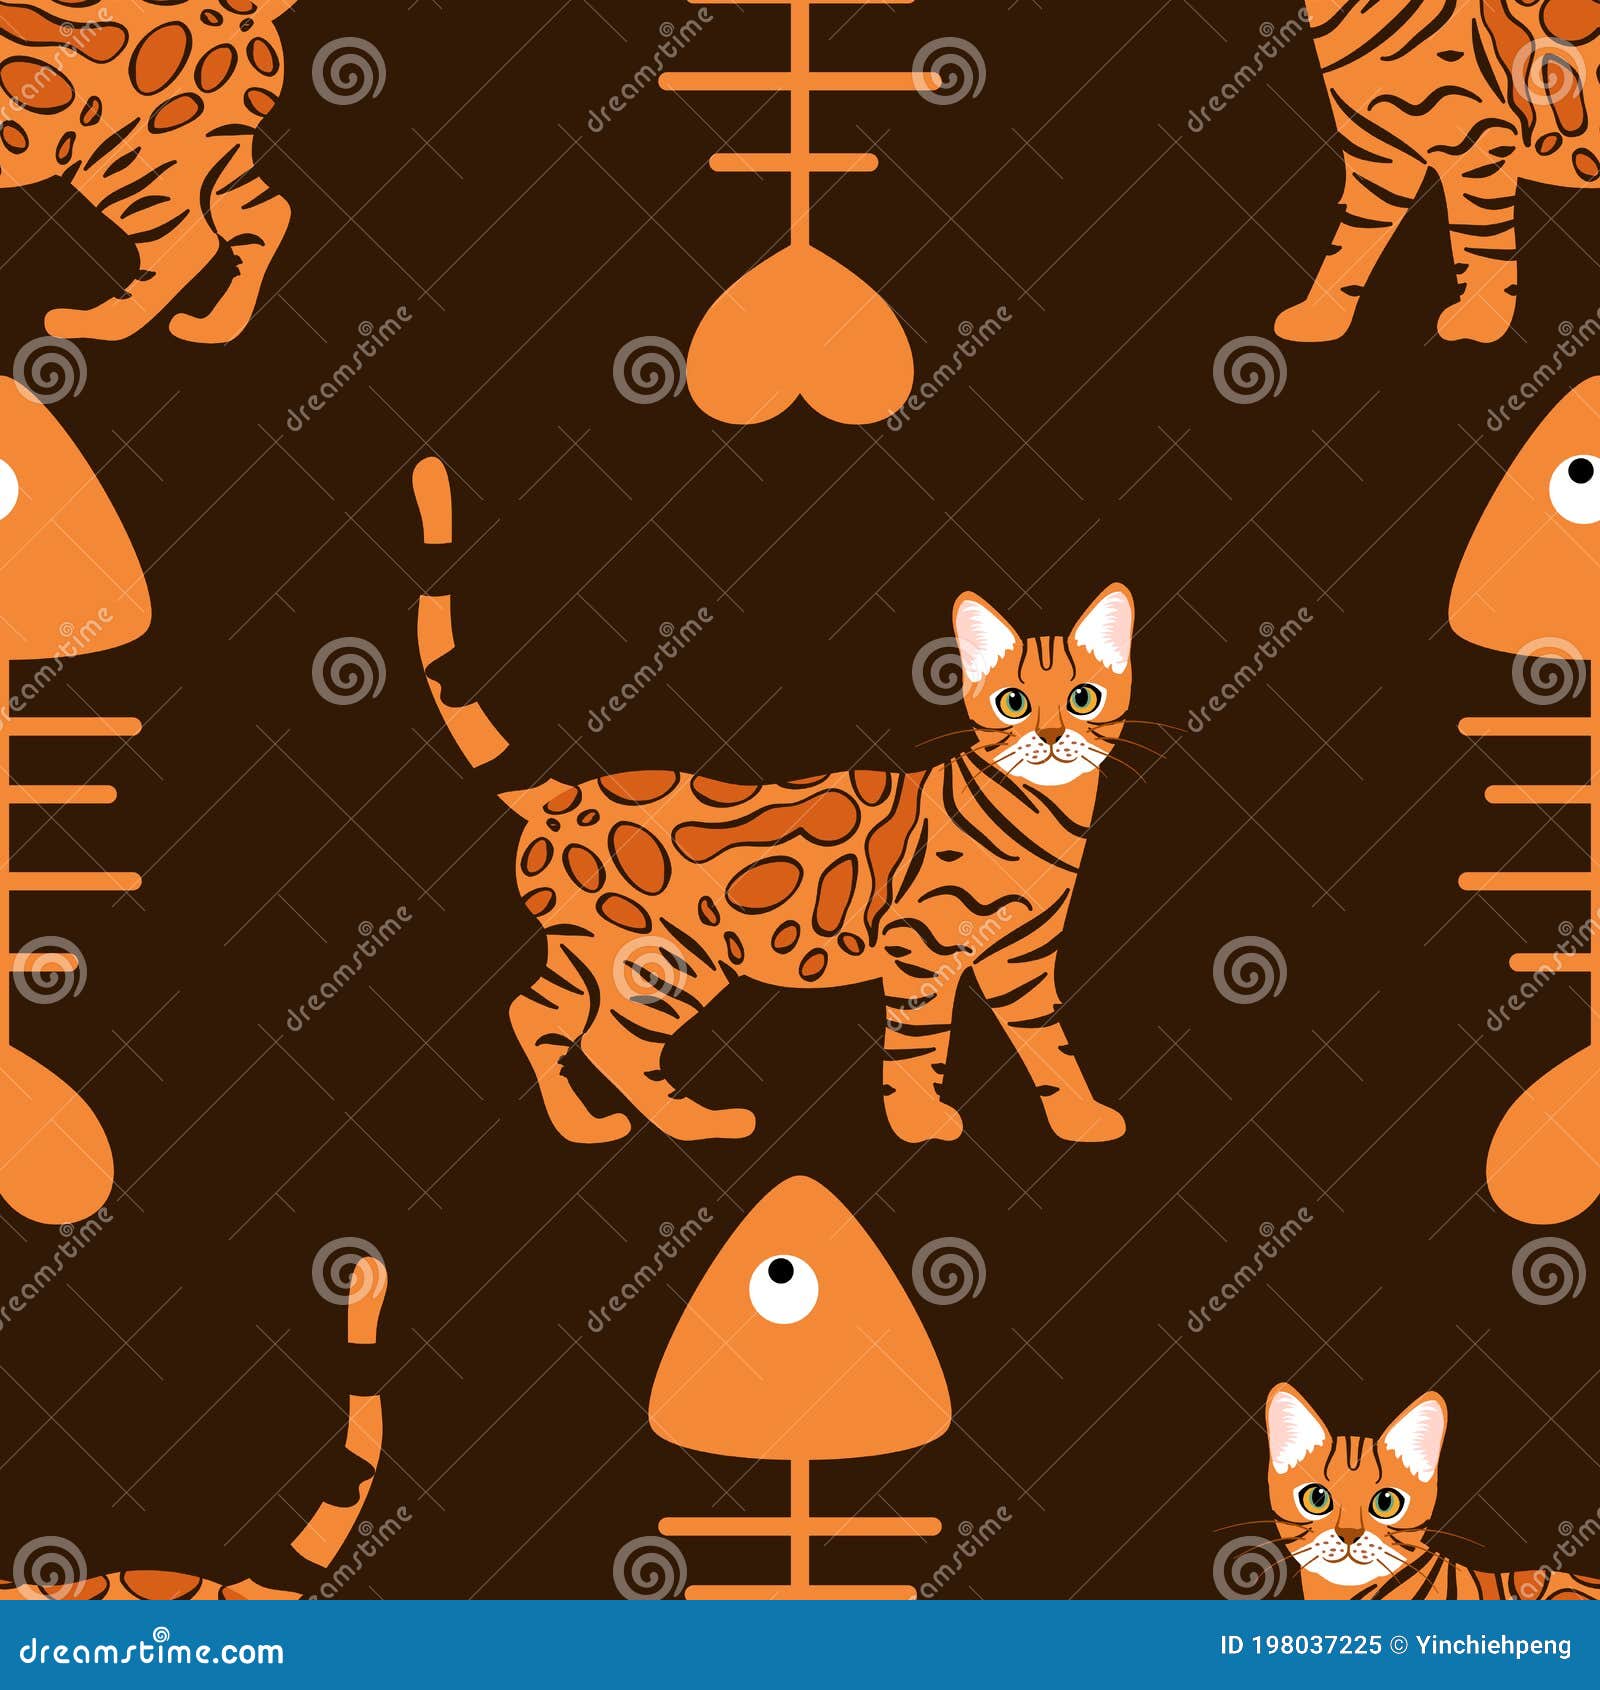 Bengal Cat Seamless Pattern Background with Fish Bone. Cartoon Orange Tabby  Spotted Cat Kitten Background Stock Vector - Illustration of decoration,  fish: 198037225